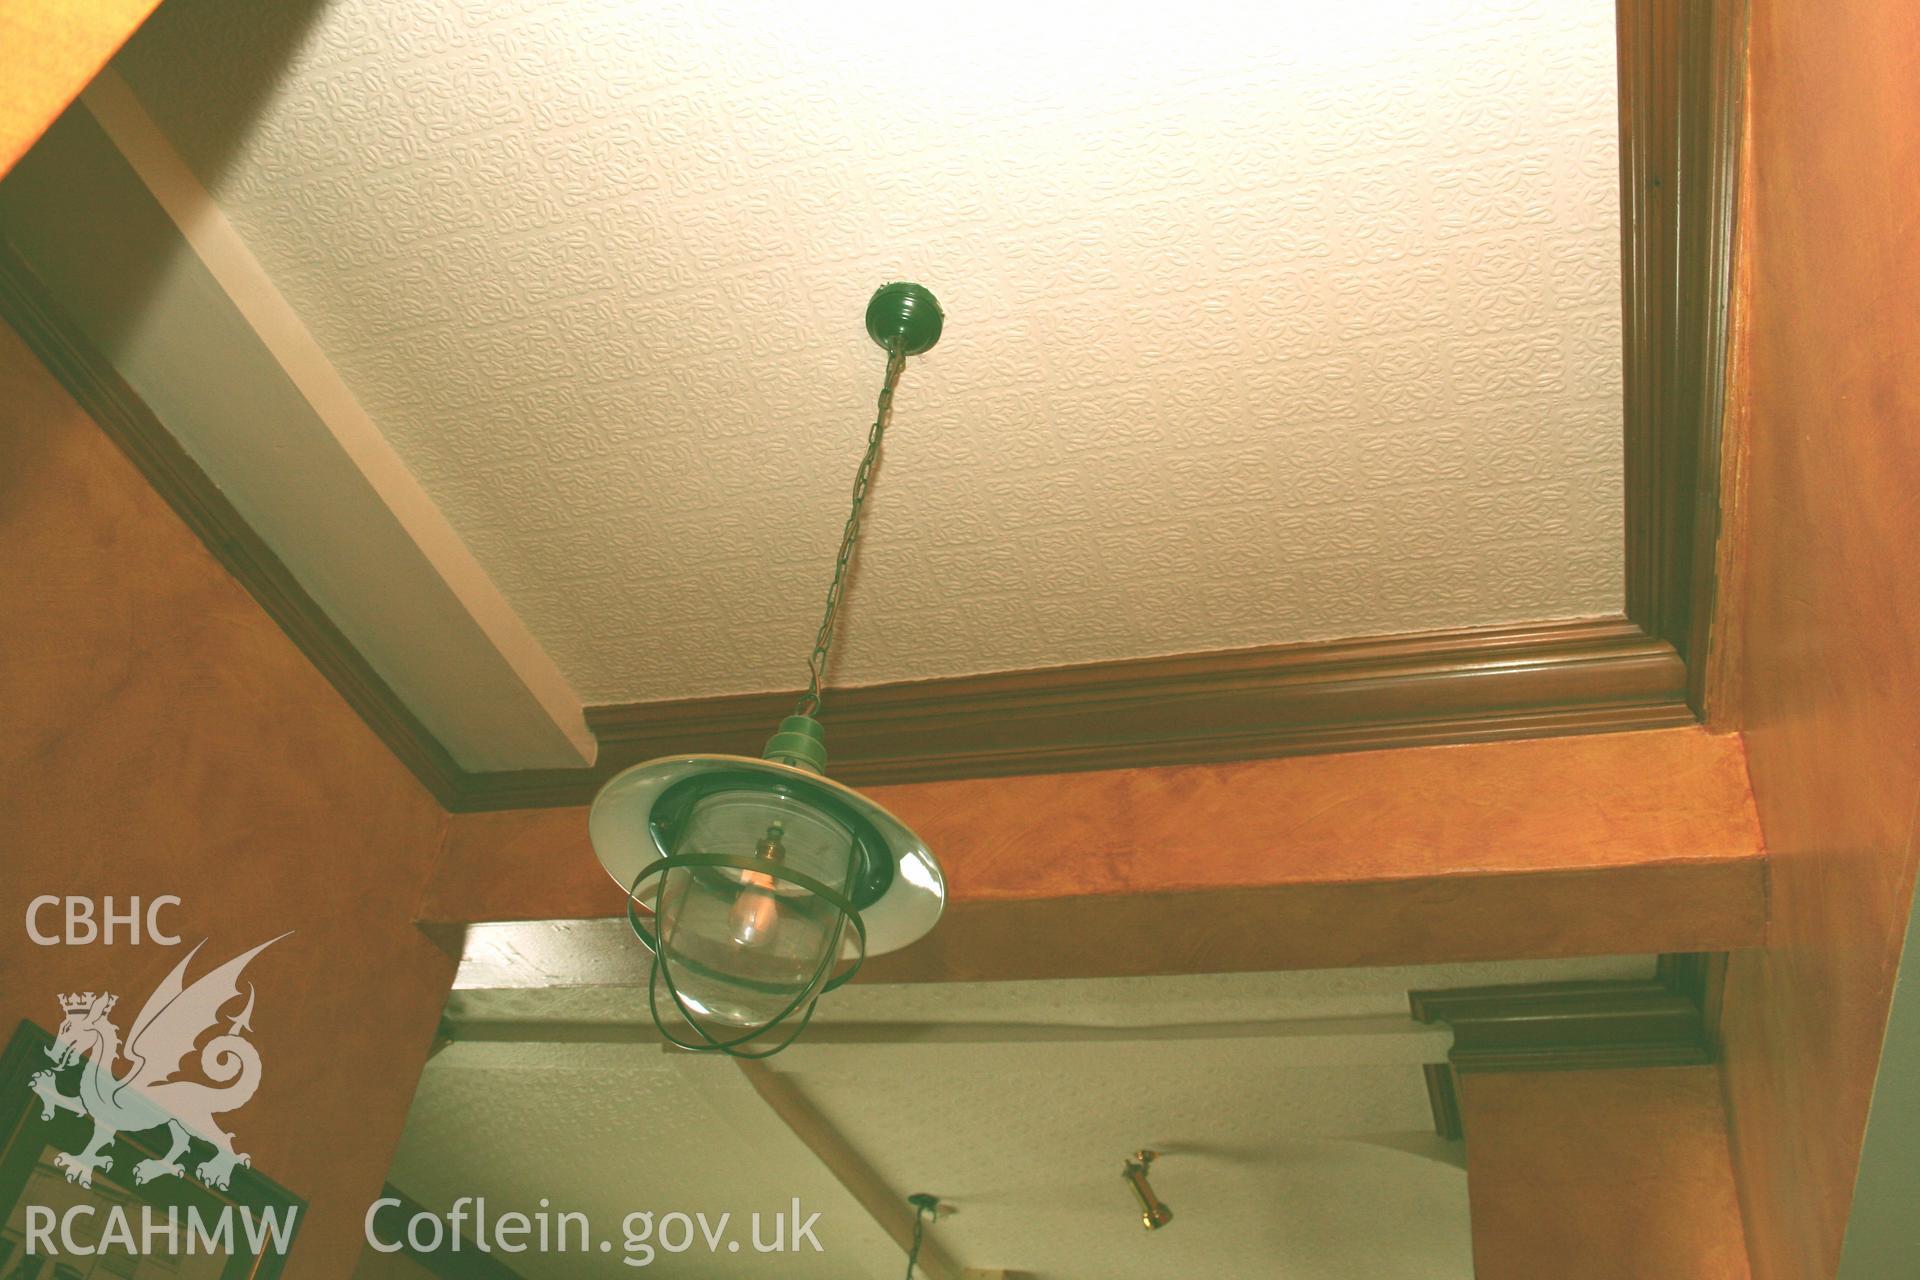 Turf Hotel, Mold Road, Wrexham. Interior, ceiling & cornice in entrance-hall.